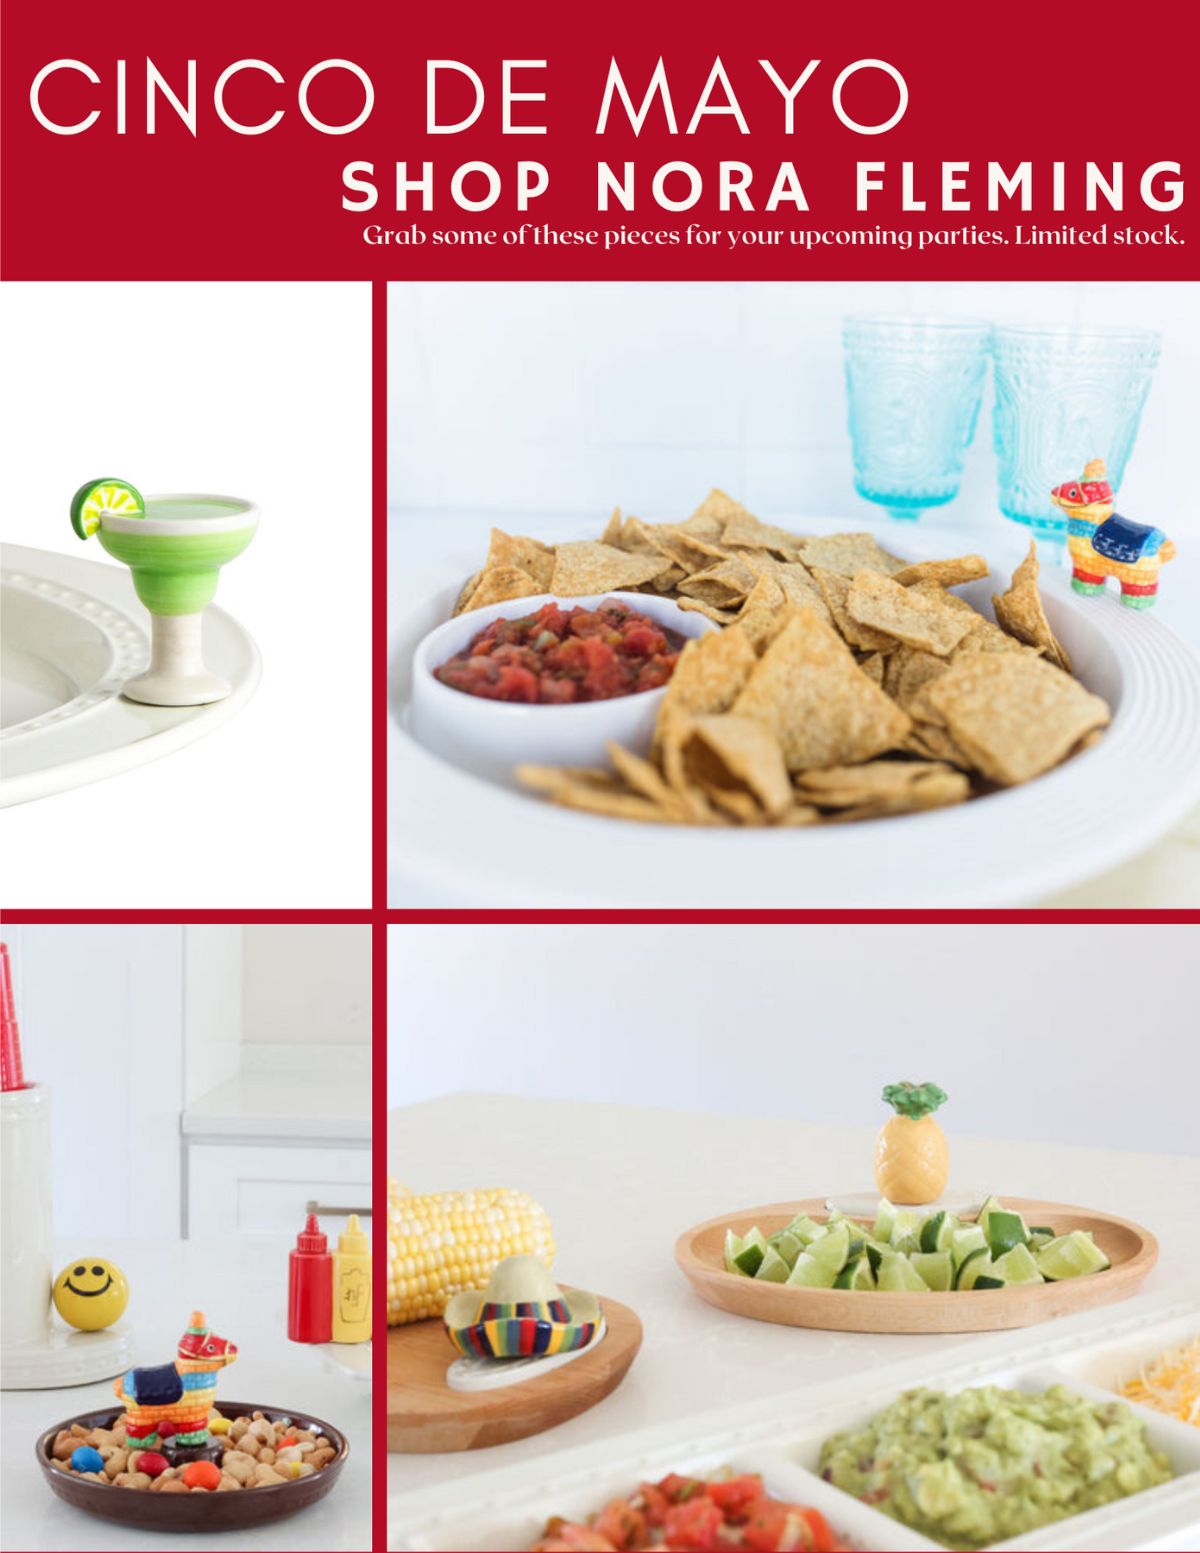 Serve up Cinco de Mayo with Nora Fleming